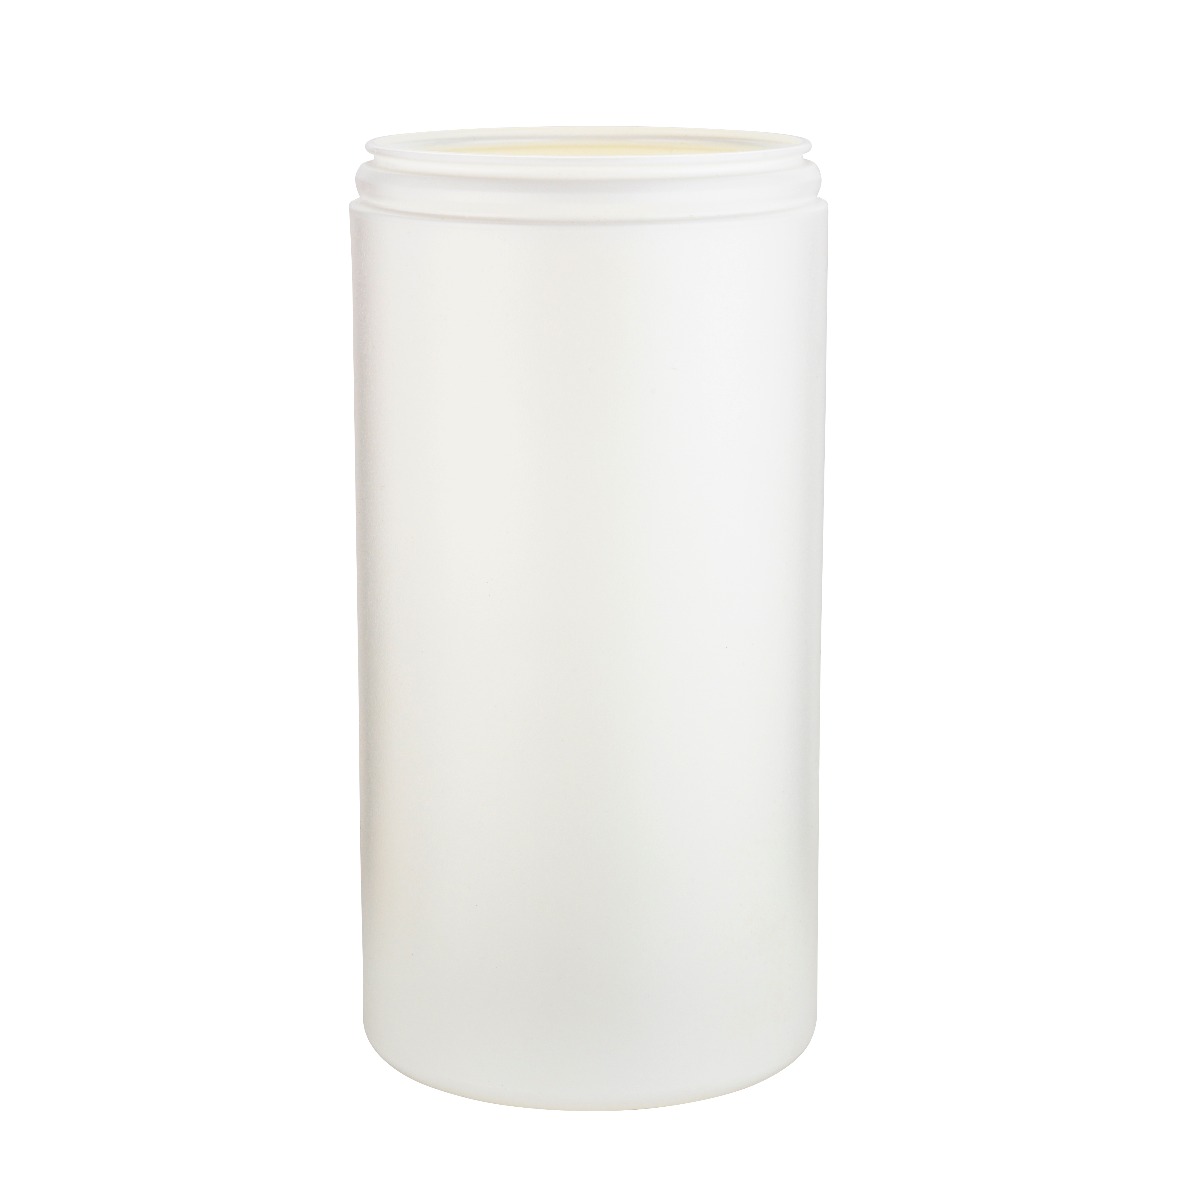 Plastic cylinder container